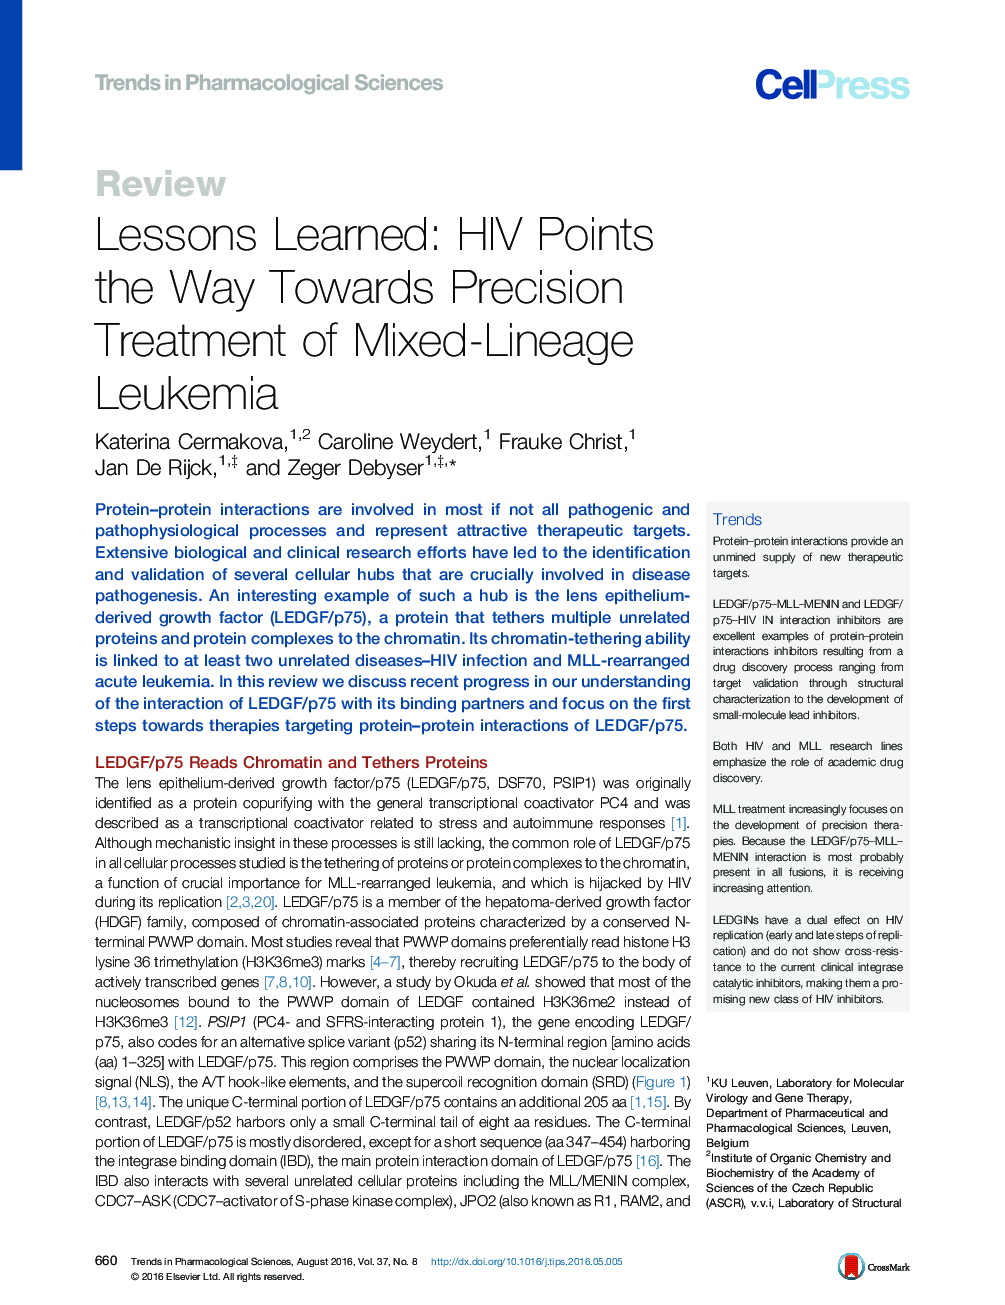 Lessons Learned: HIV Points the Way Towards Precision Treatment of Mixed-Lineage Leukemia